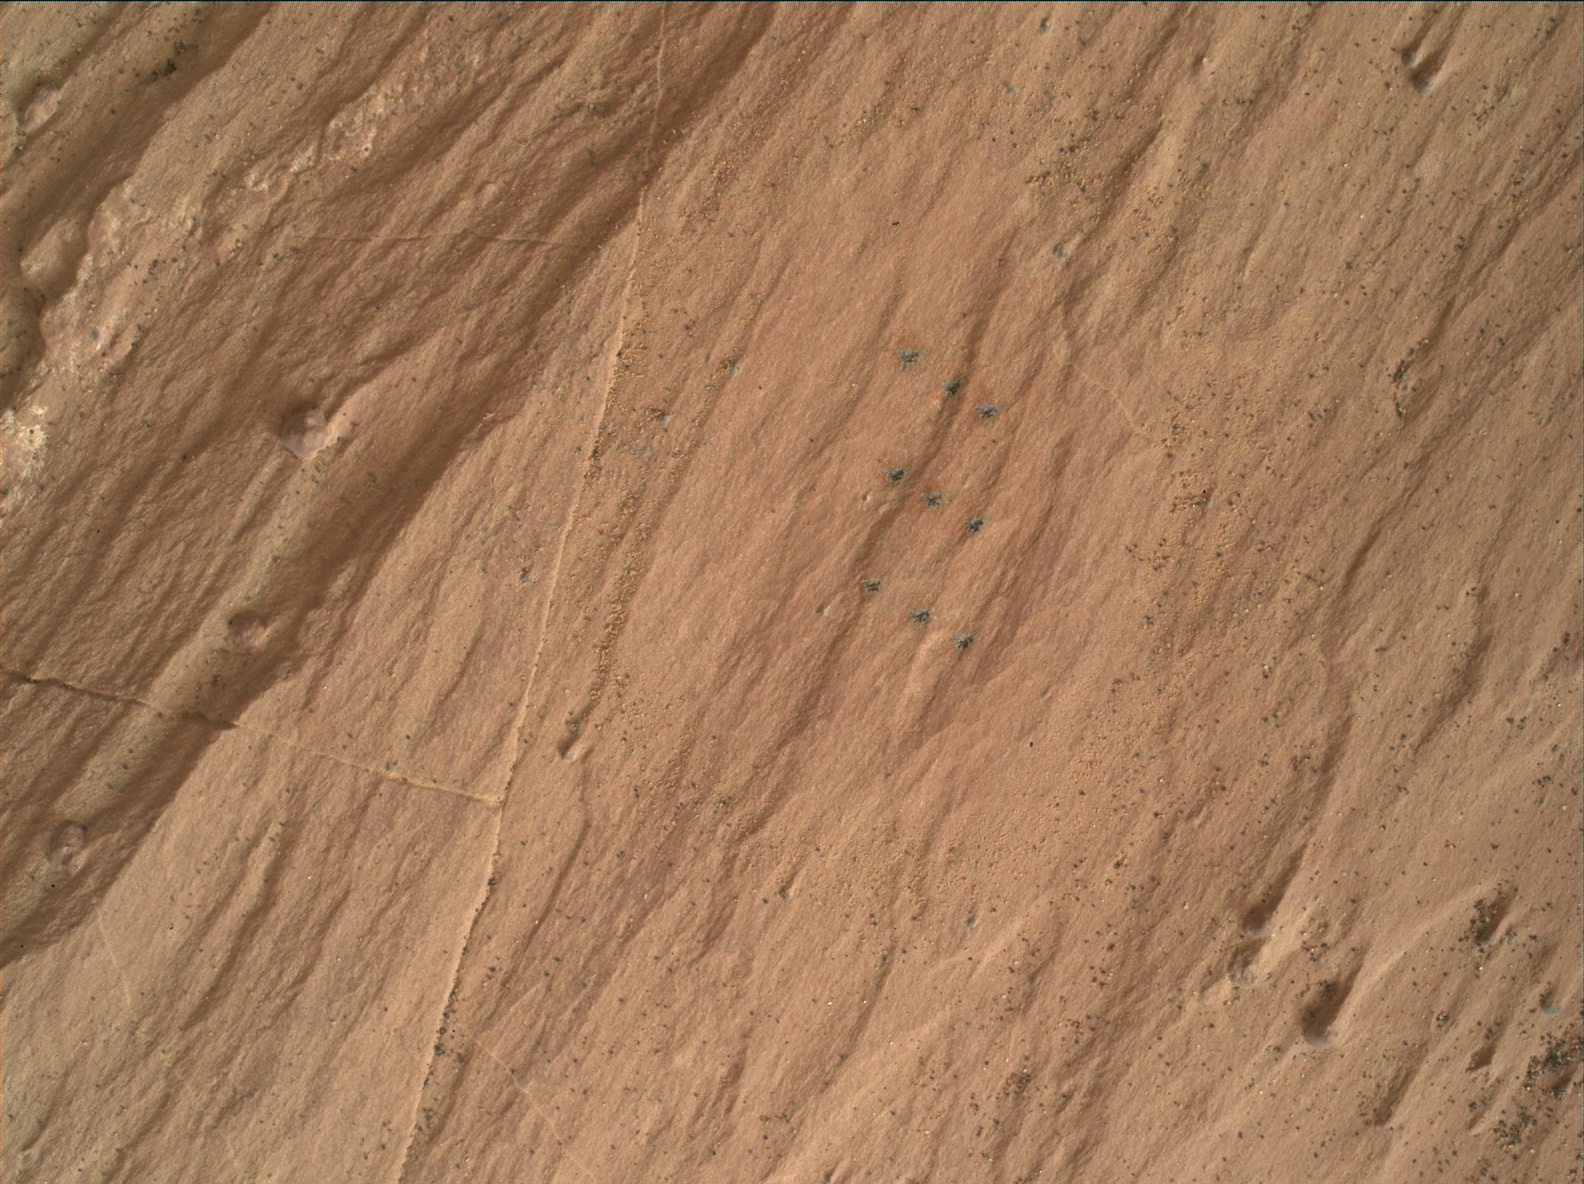 Nasa's Mars rover Curiosity acquired this image using its Mars Hand Lens Imager (MAHLI) on Sol 1610